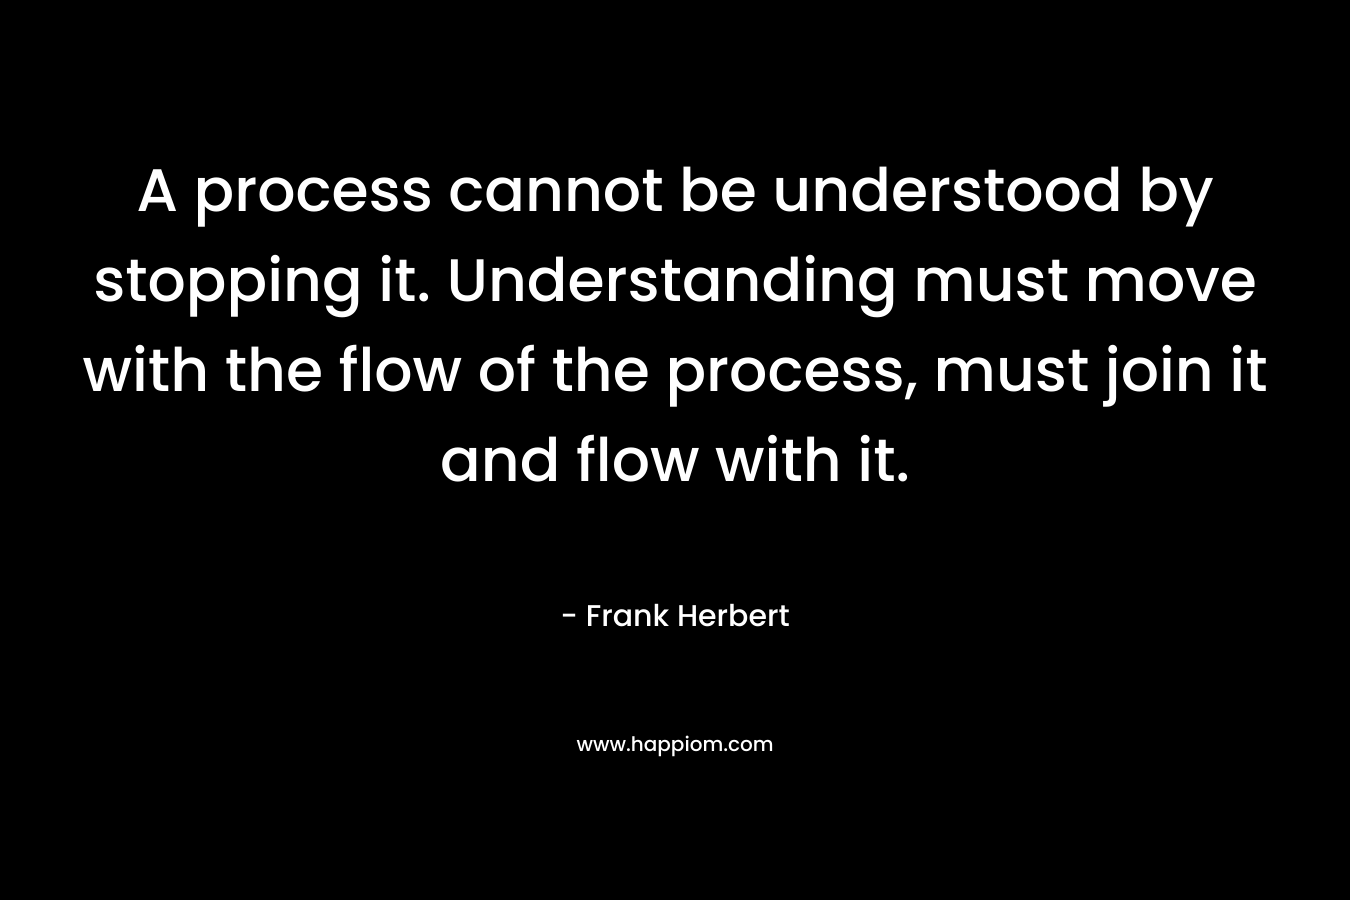 A process cannot be understood by stopping it. Understanding must move with the flow of the process, must join it and flow with it.